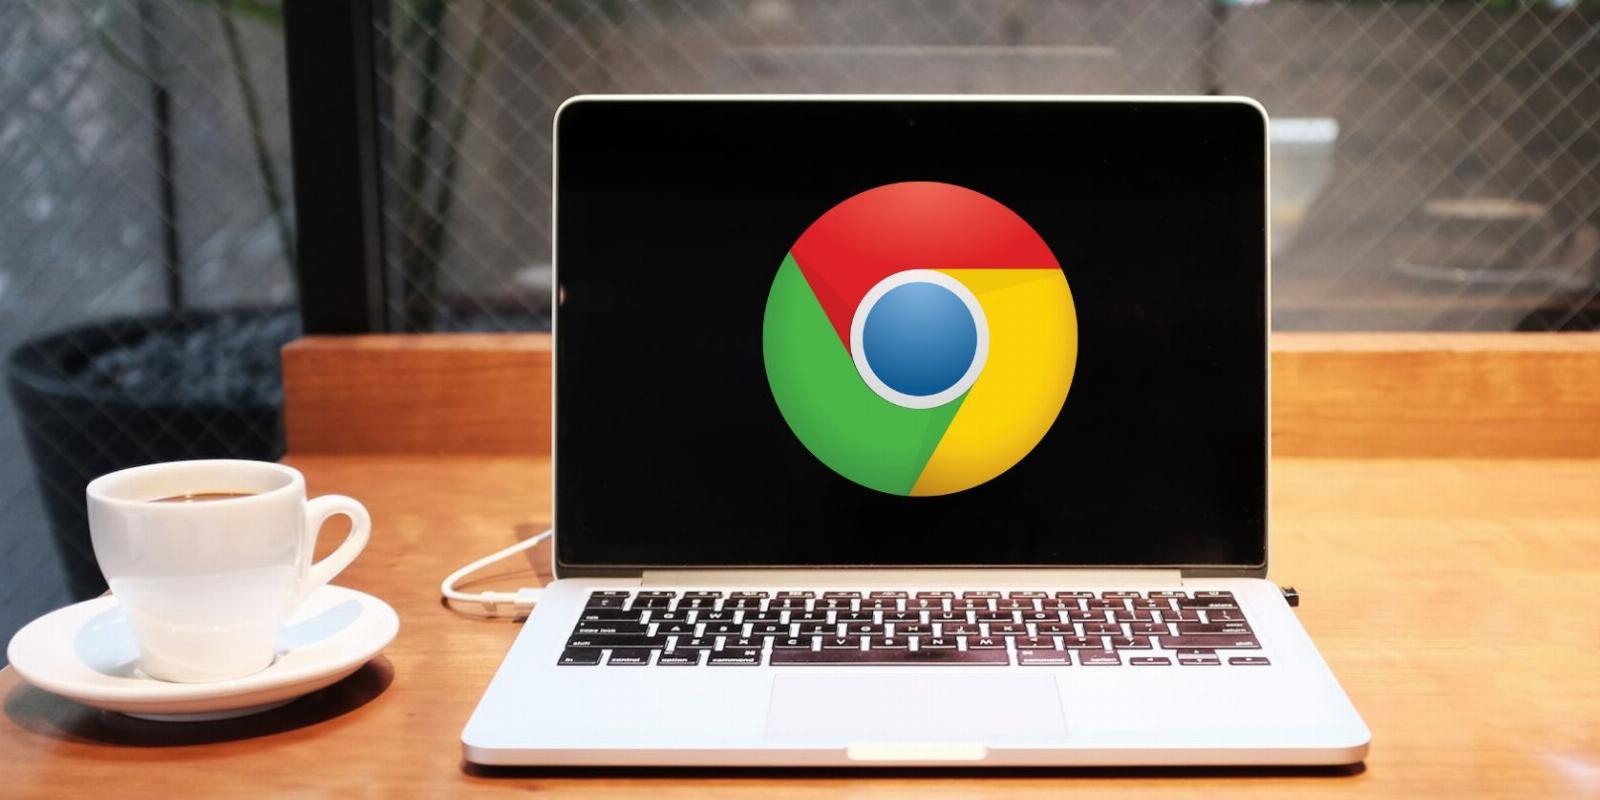 Chrome 109 Has Arrived: What’s New in the Update?